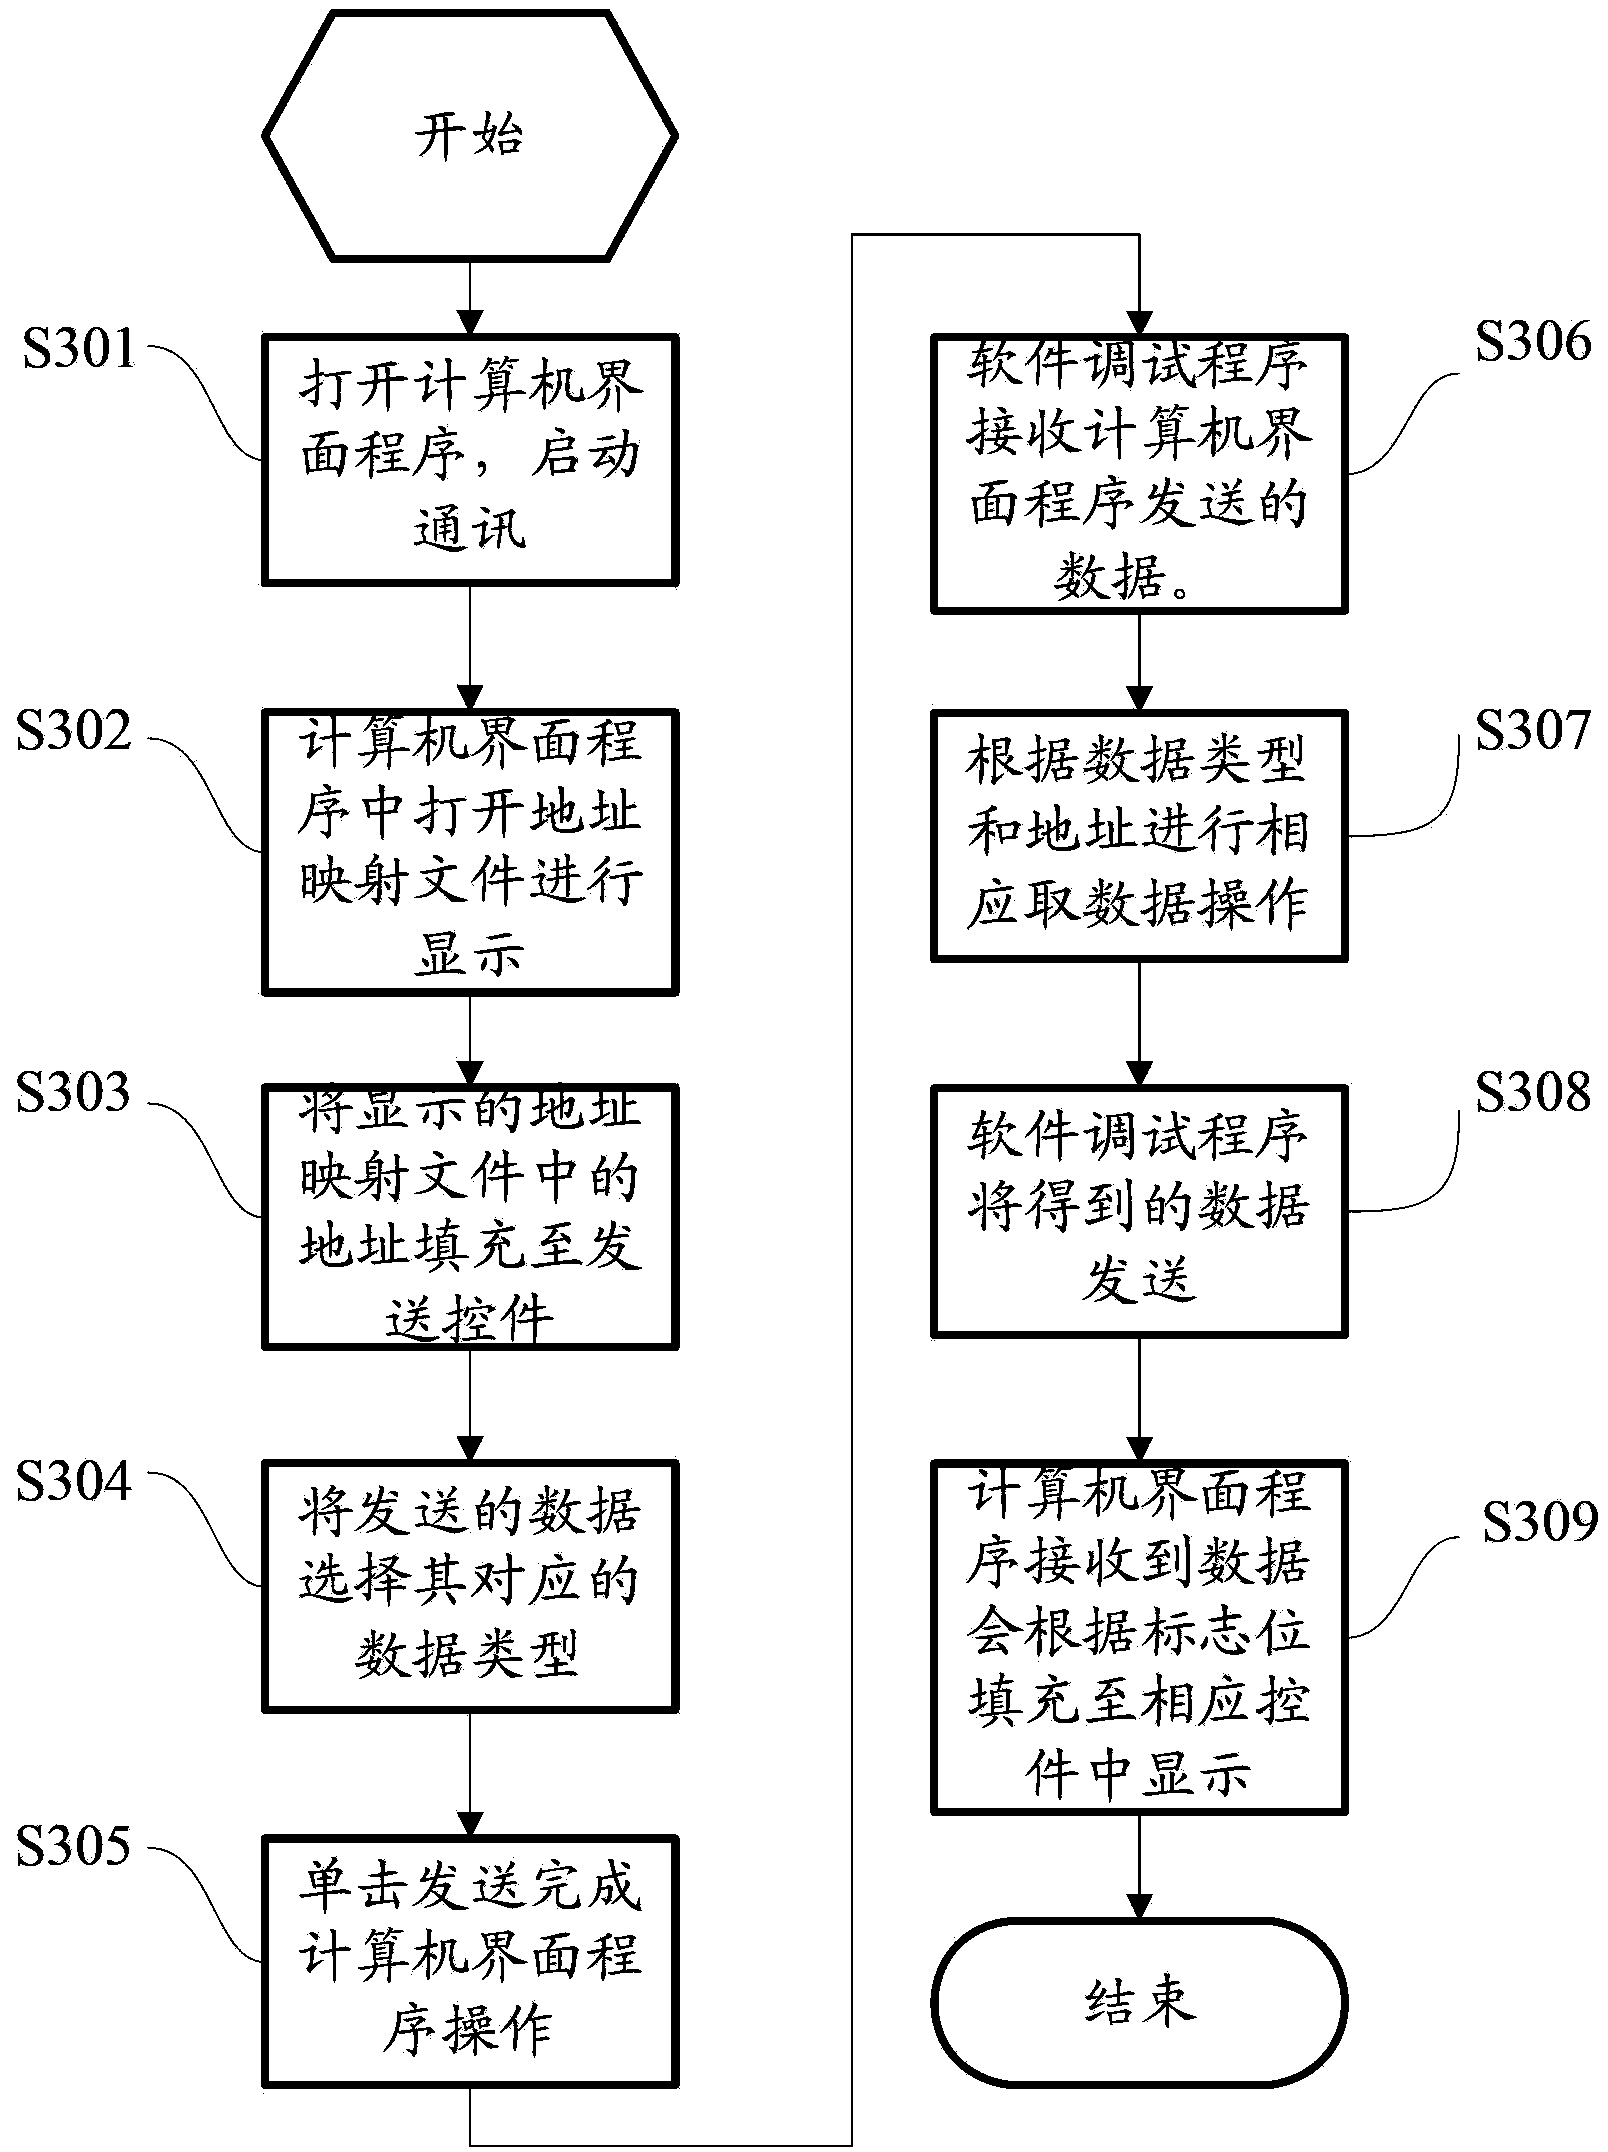 Method and system for obtaining vehicle debugging data